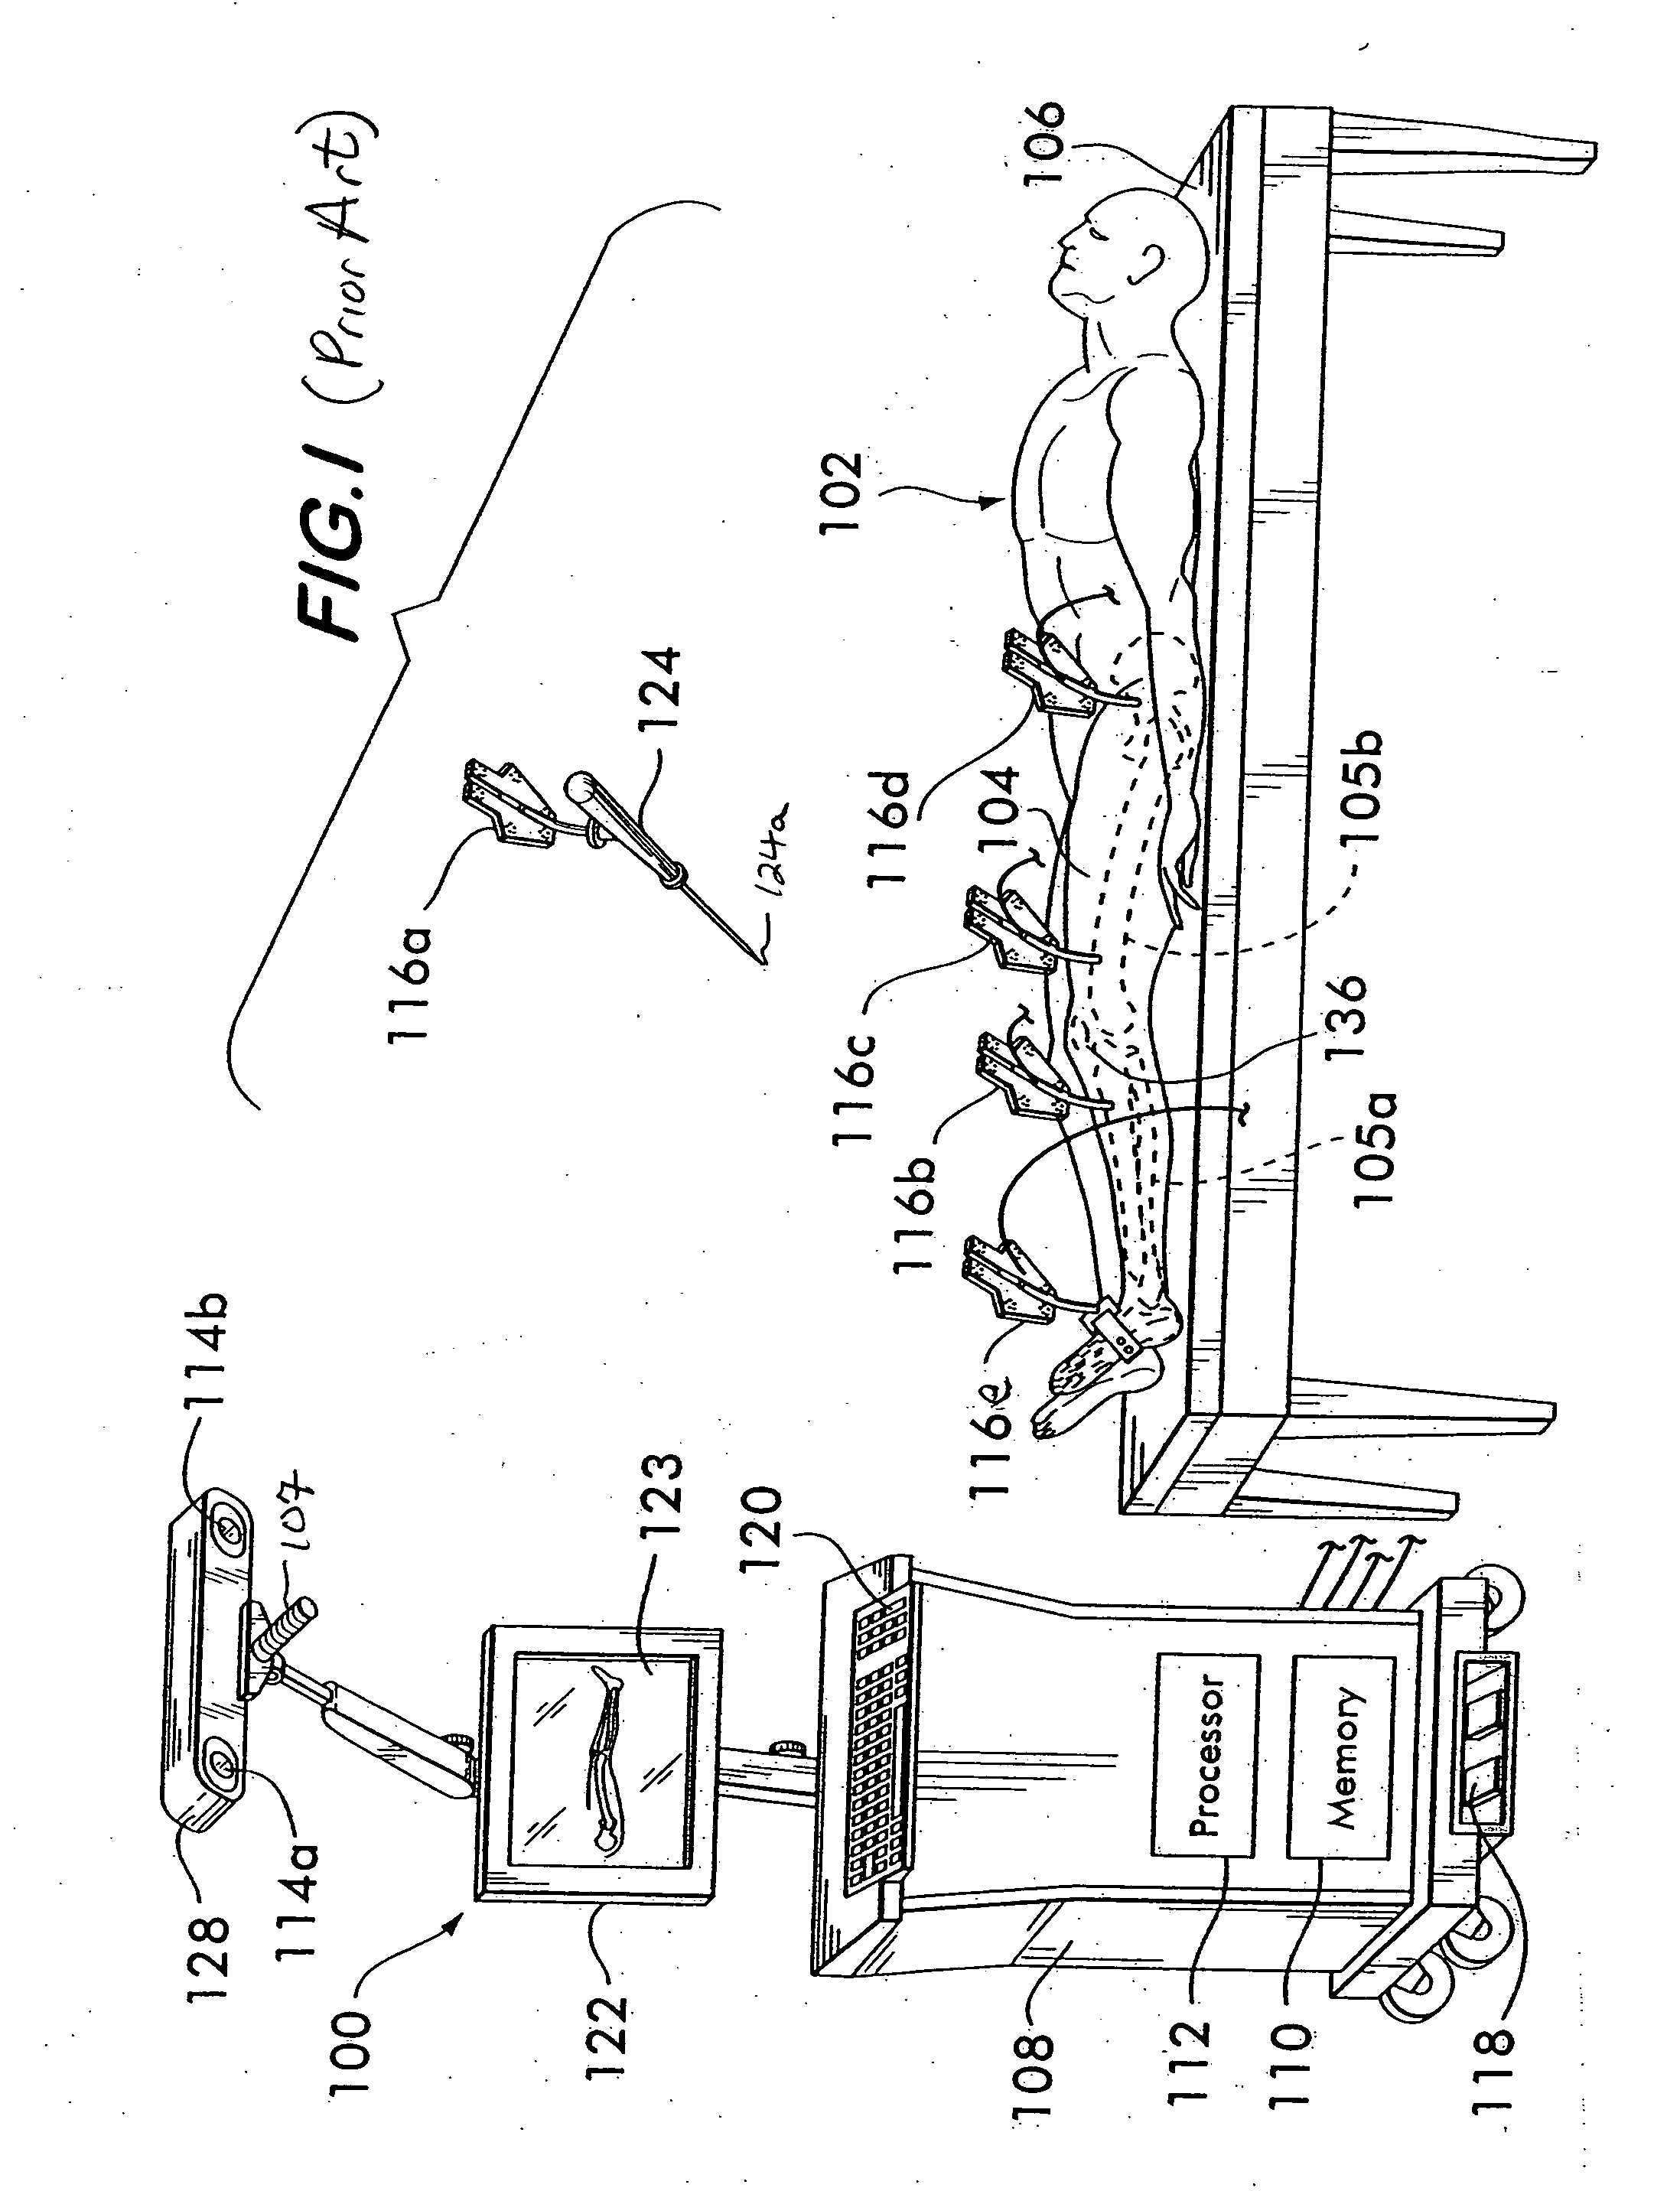 Method and apparatus for positioning a cutting tool for orthopedic surgery using a localization system